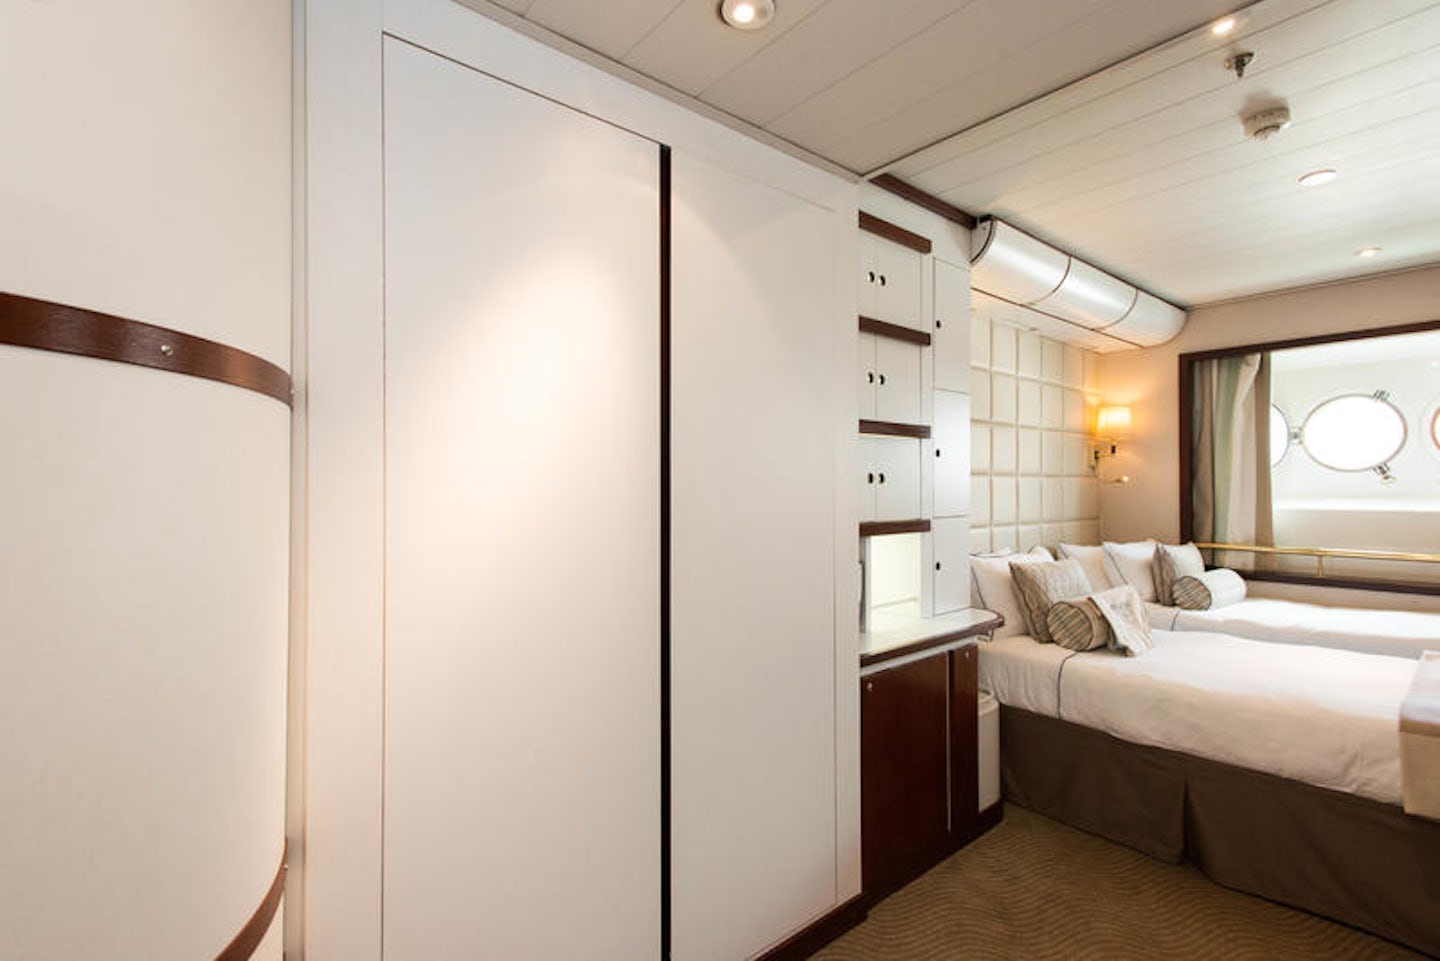 The Suite on Wind Surf